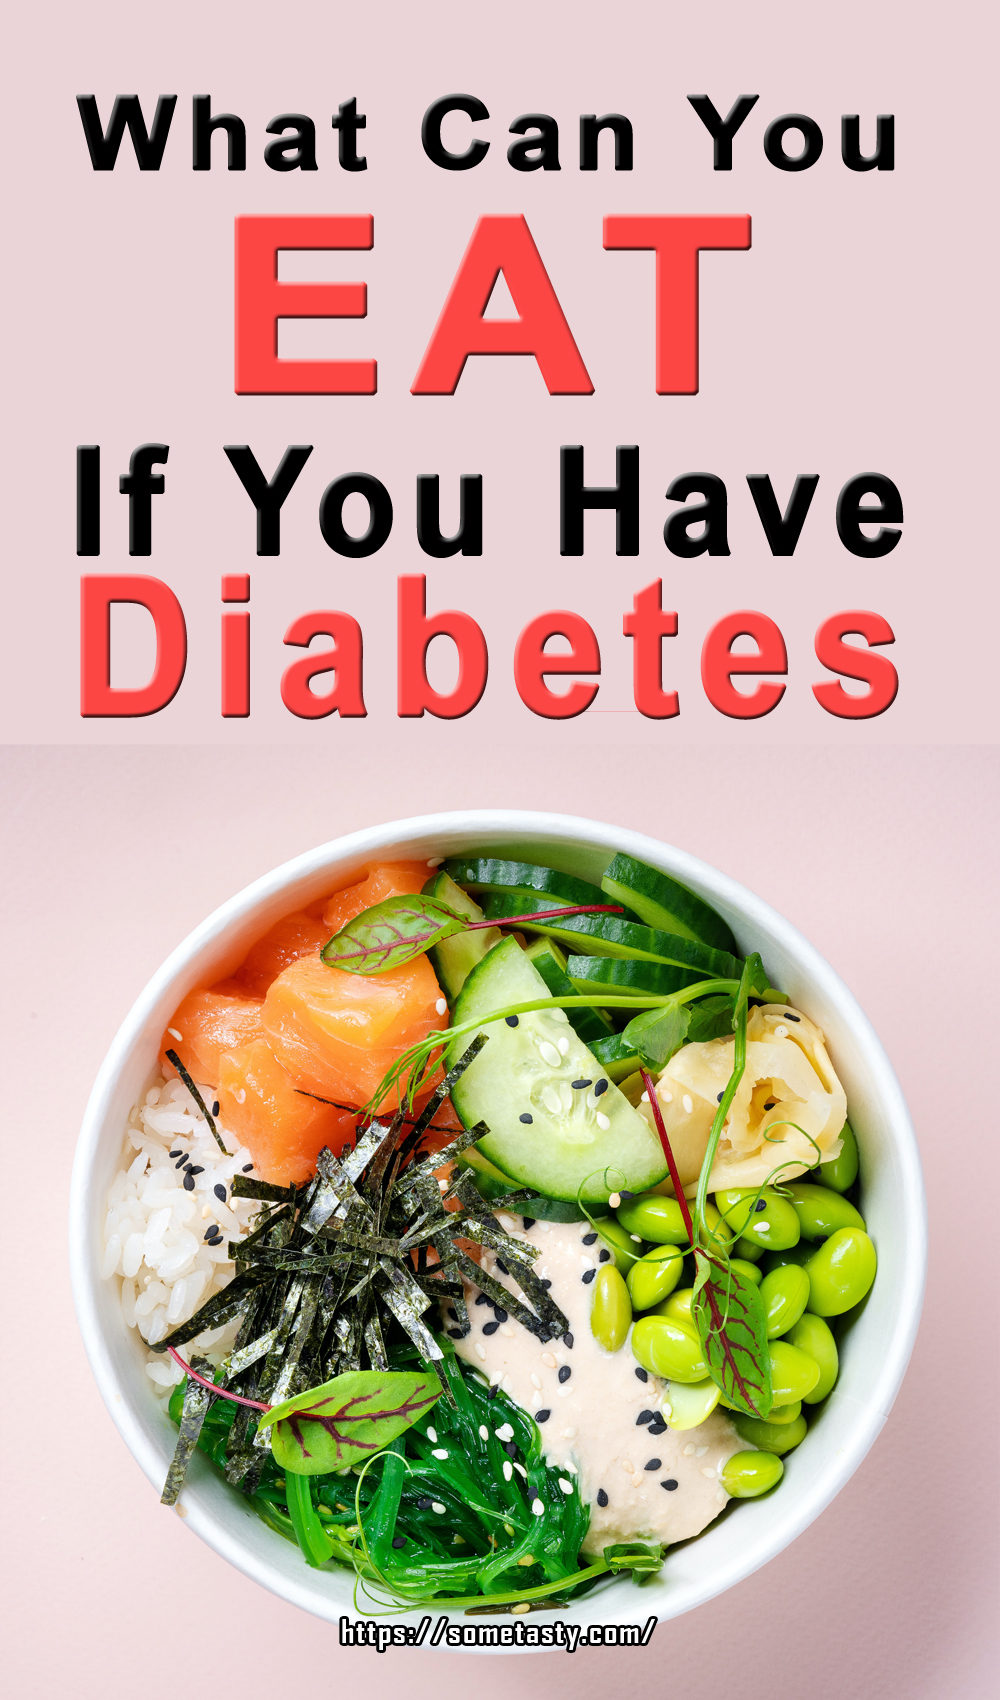 What Can You Eat If You Have Diabetes? – Some tasty